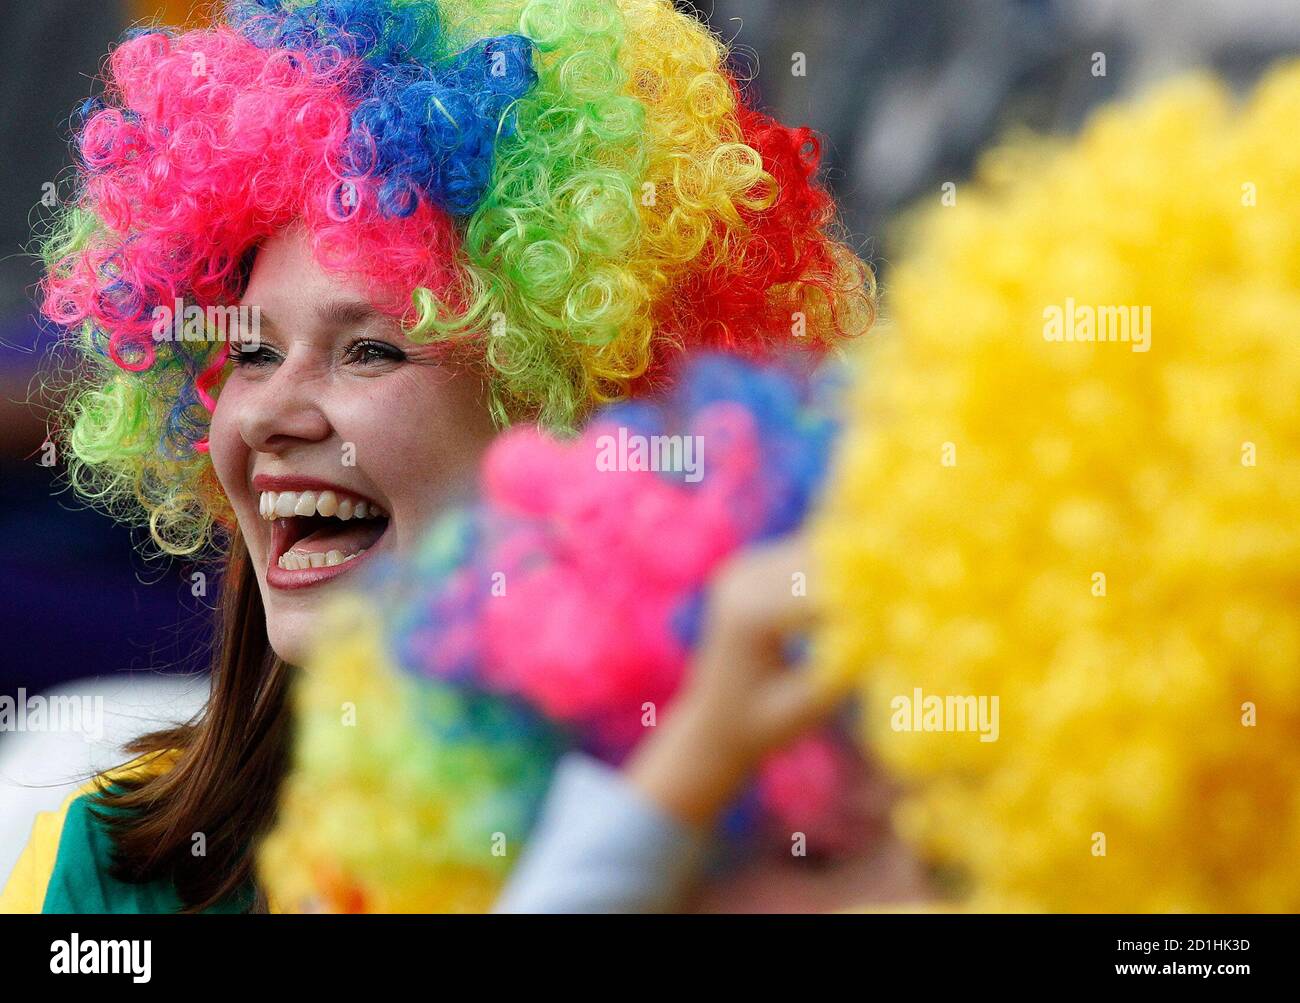 A fan cheers before the start of the 2010 World Cup Group G soccer match between North Korea and Ivory Coast at Mbombela stadium in Nelspruit June 25, 2010.    REUTERS/Thomas Mukoya (SOUTH AFRICA  - Tags: SPORT SOCCER WORLD CUP IMAGE OF THE DAY TOP PICTURE) Stock Photo